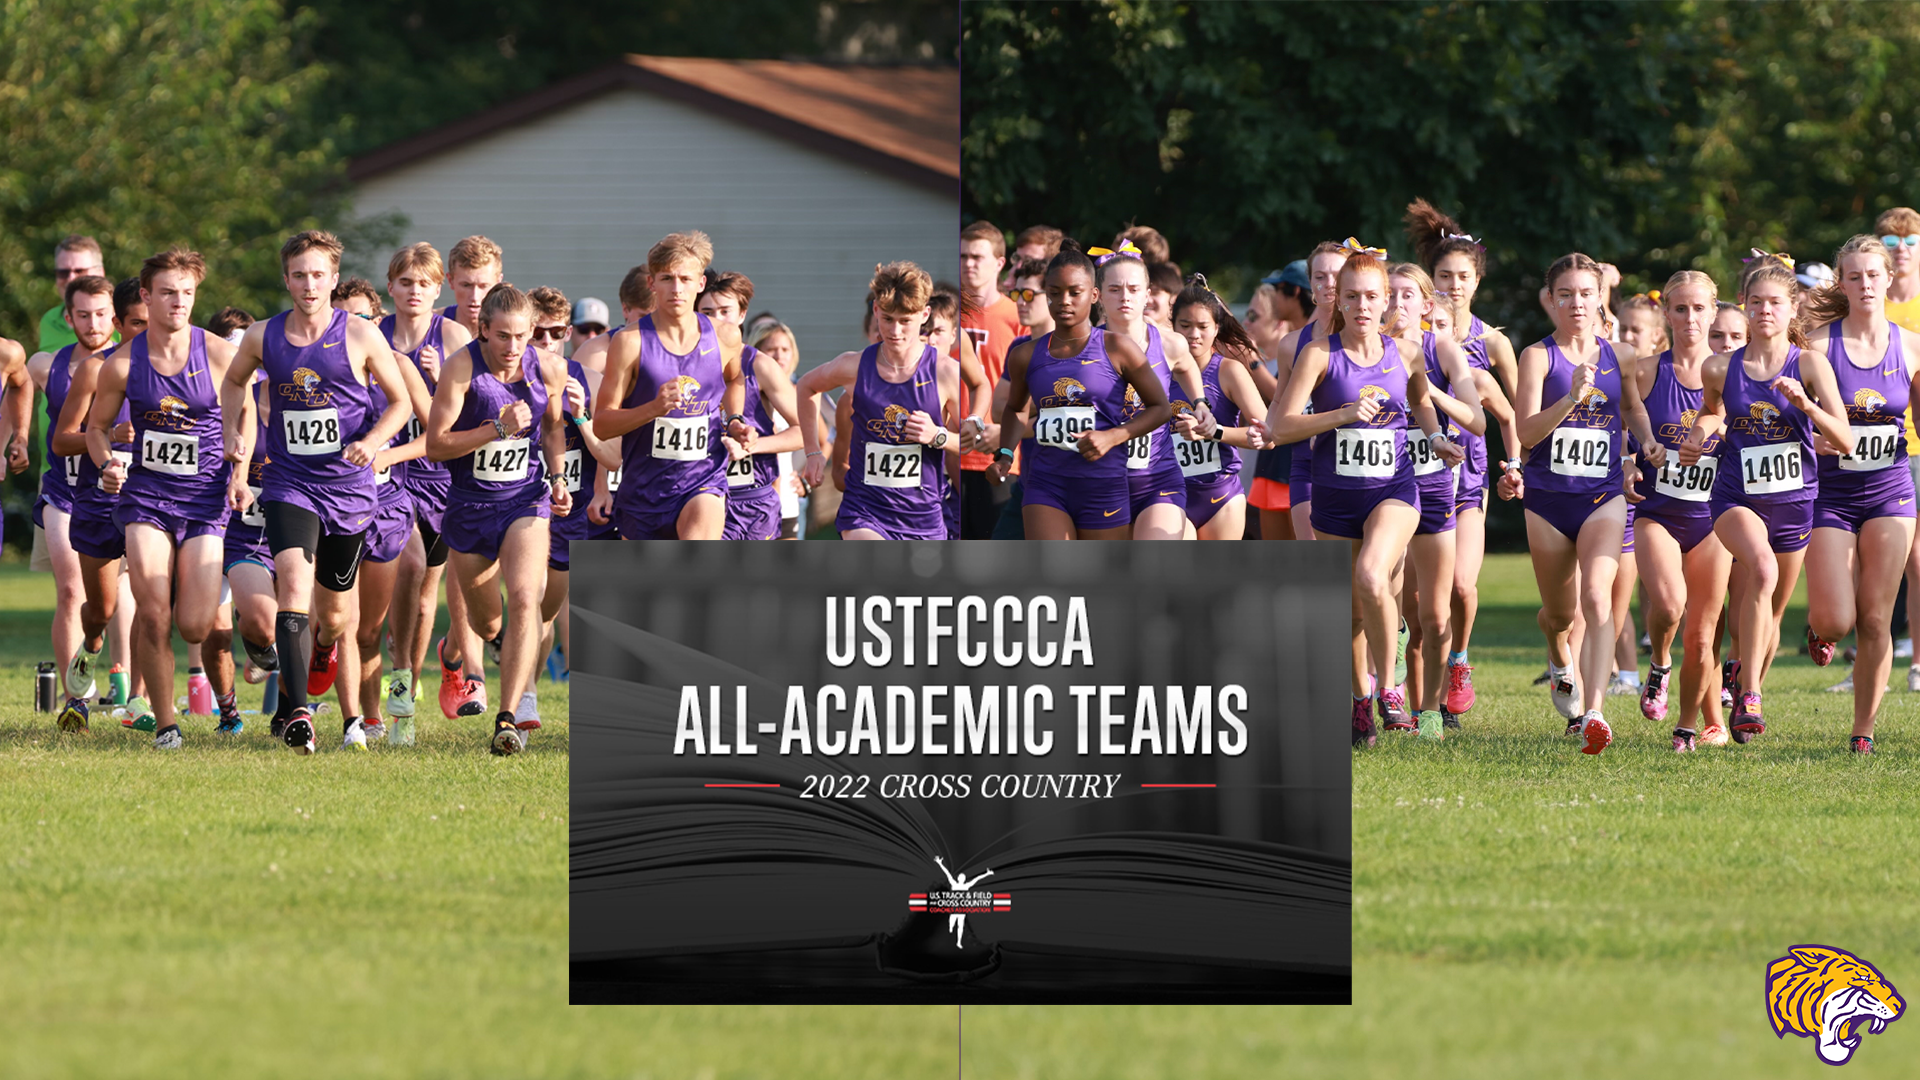 ONU MEN’S AND WOMEN’S COUNTRY NAMED USTFCCCA ALL-ACADEMIC TEAMS